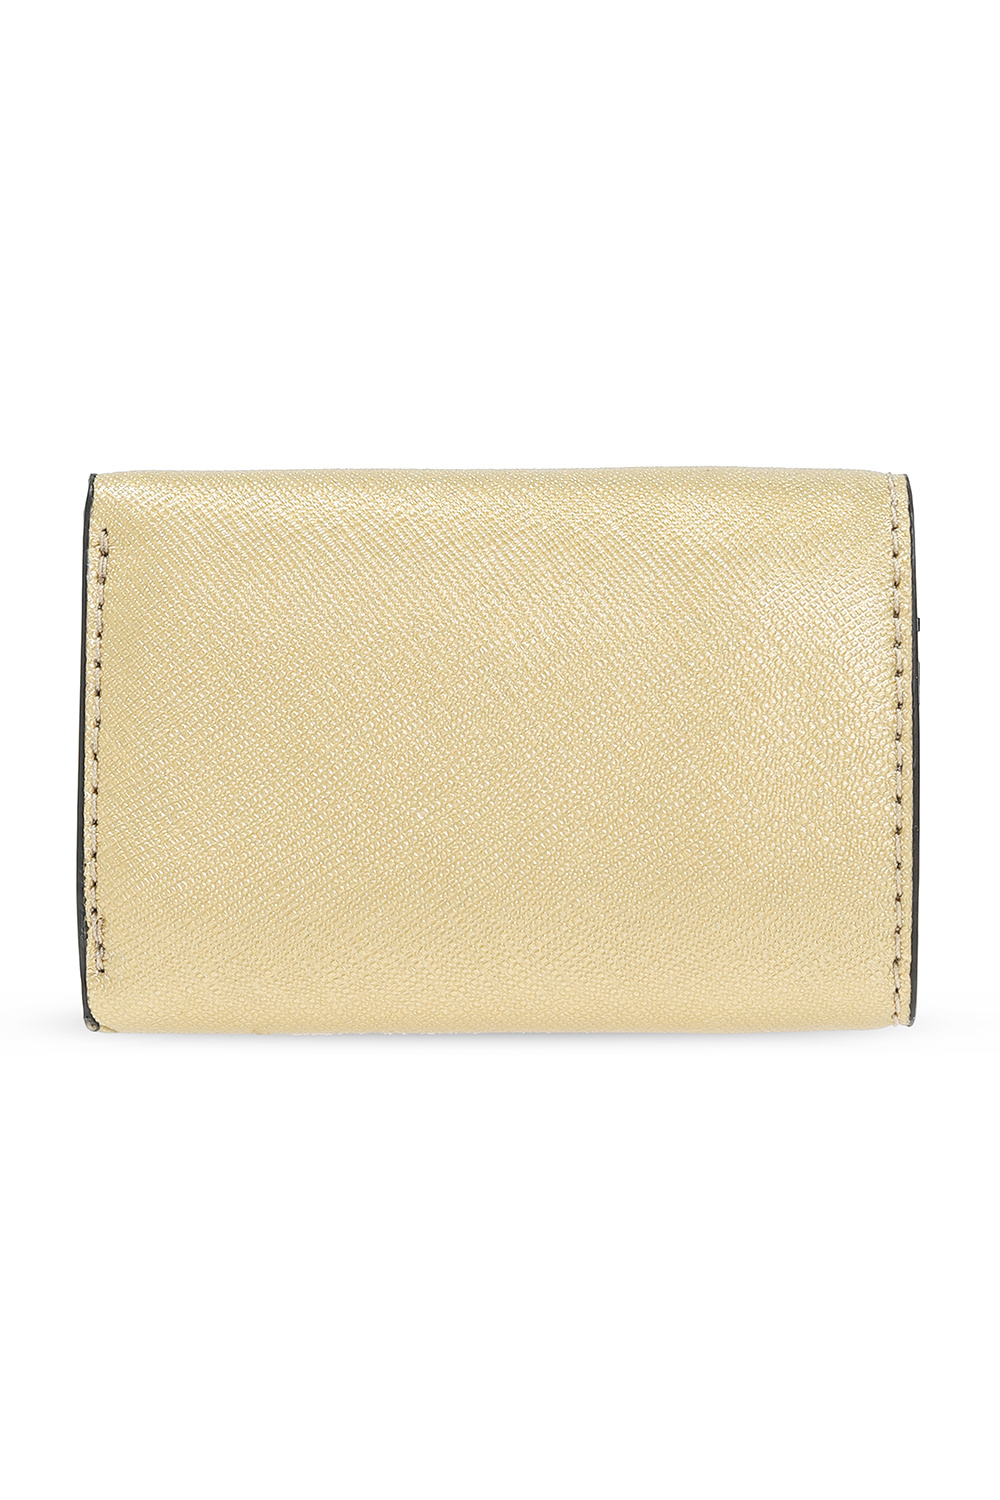 Marc Jacobs Marc Jacobs The WOMEN BAGS CLUTCH BAGS